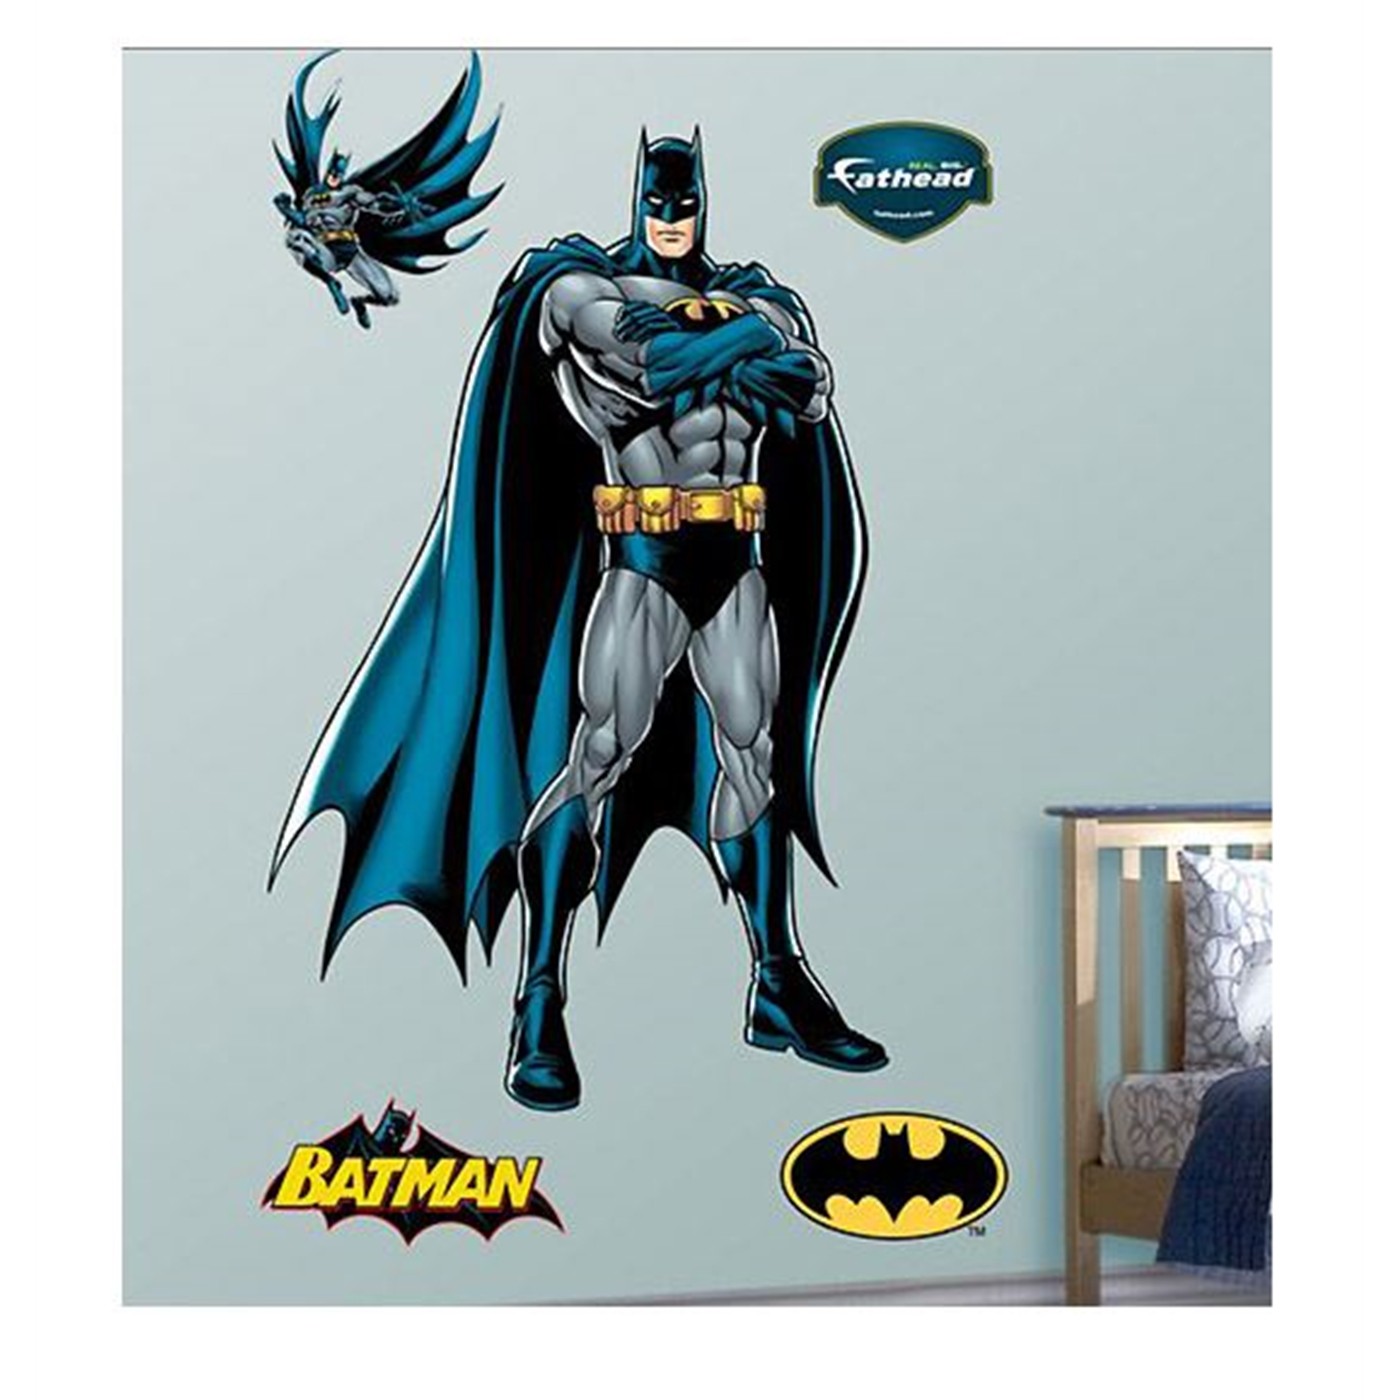 Batman Proud Stance Life Size Wall Decal